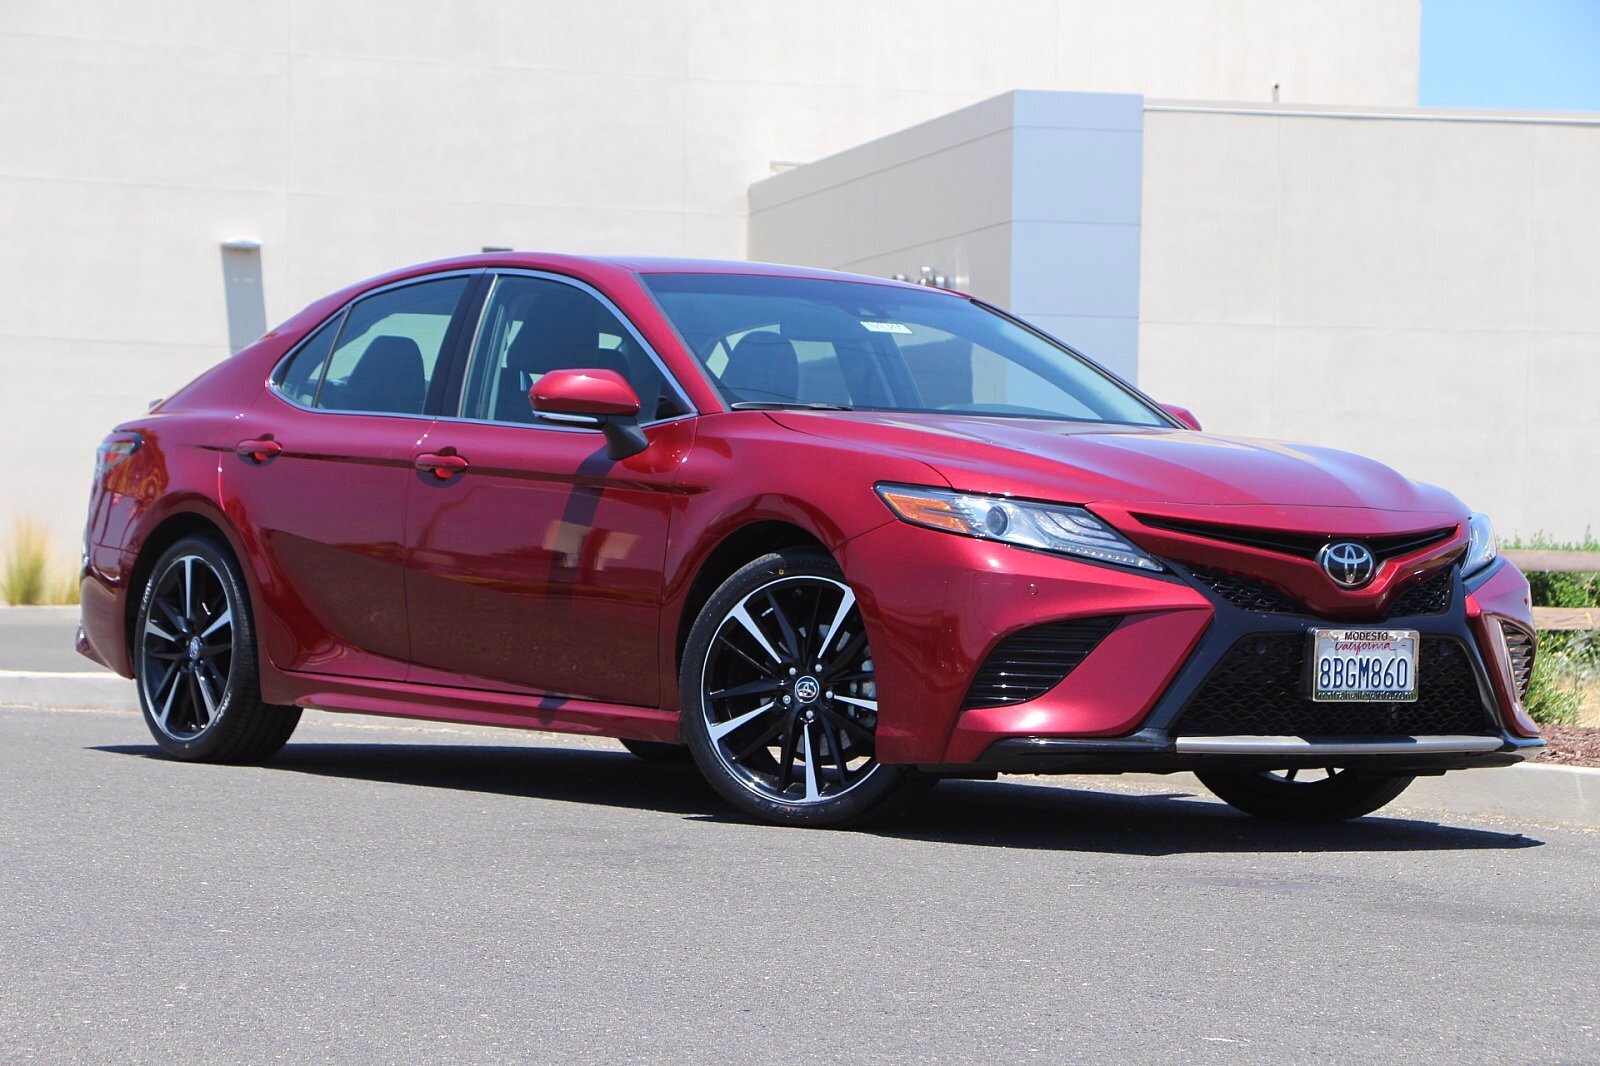 Pre Owned 2018 Toyota Camry Xse 4dr Car In Modesto In4174a